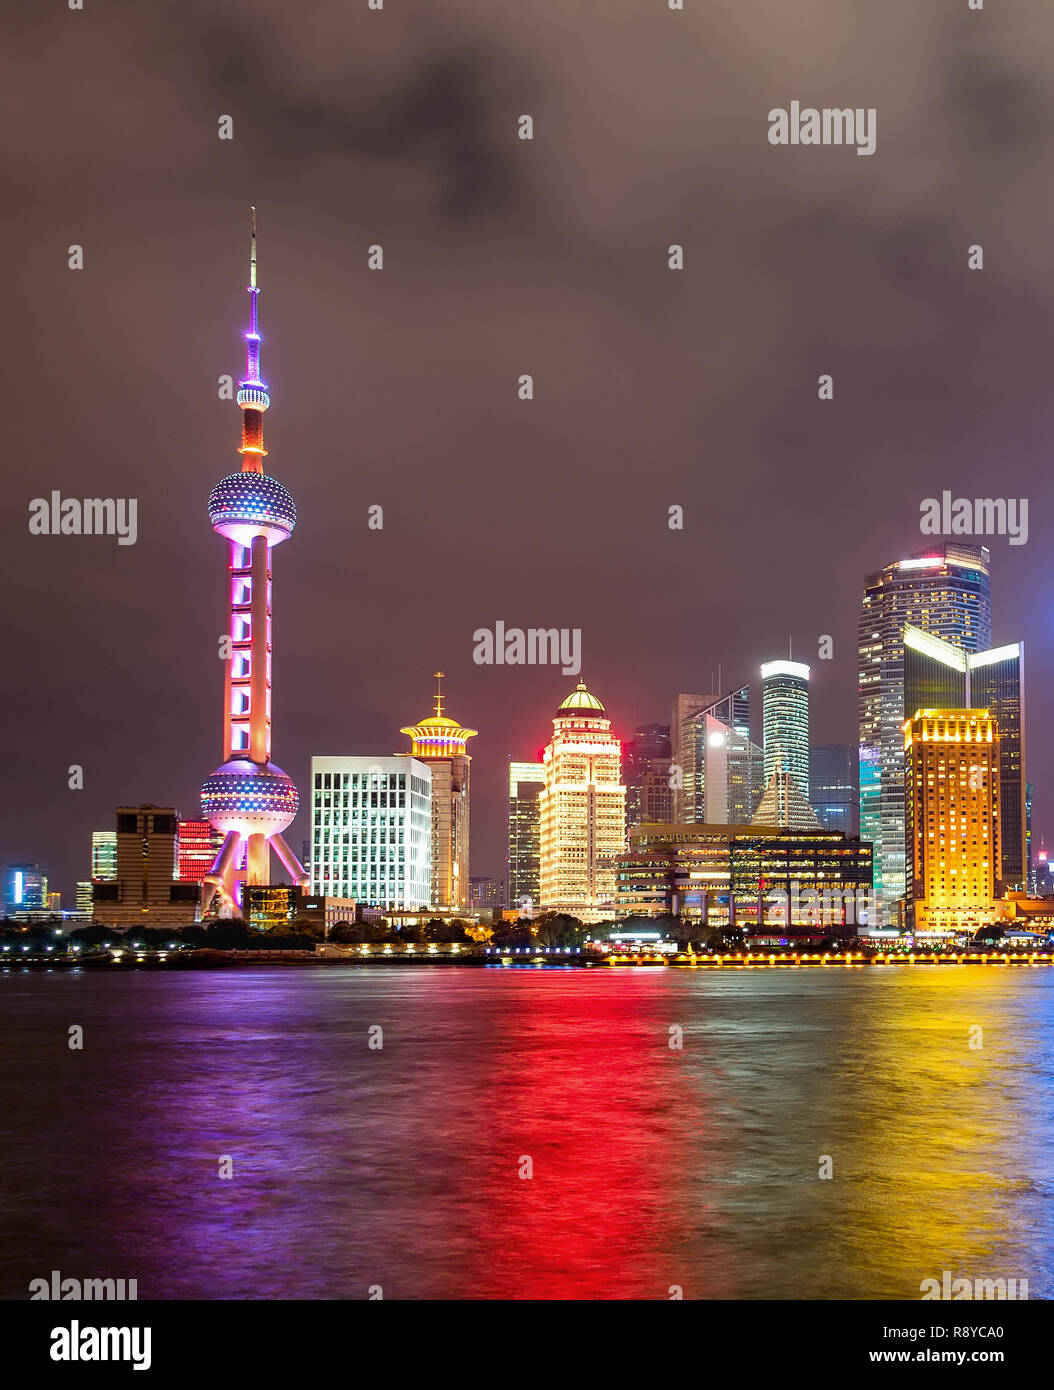 Illuminated Shanghai city skyline with colorful lights on water surface Stock Photo - Alamy